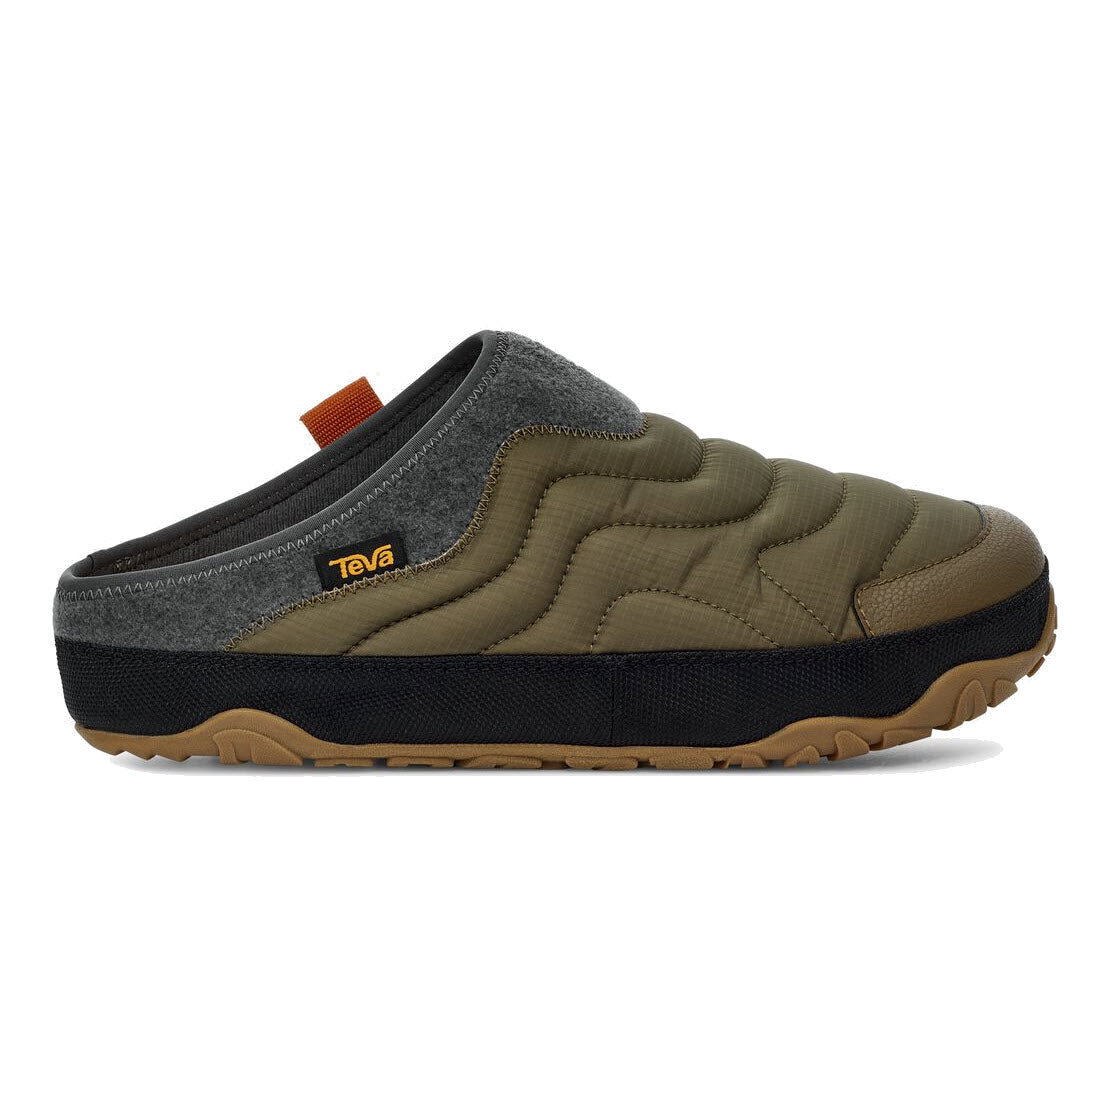 Side view of a dark olive TEVA REEMBER TERRAIN slip-on shoe with a ULTRA-COMFY insole and rubber sole.